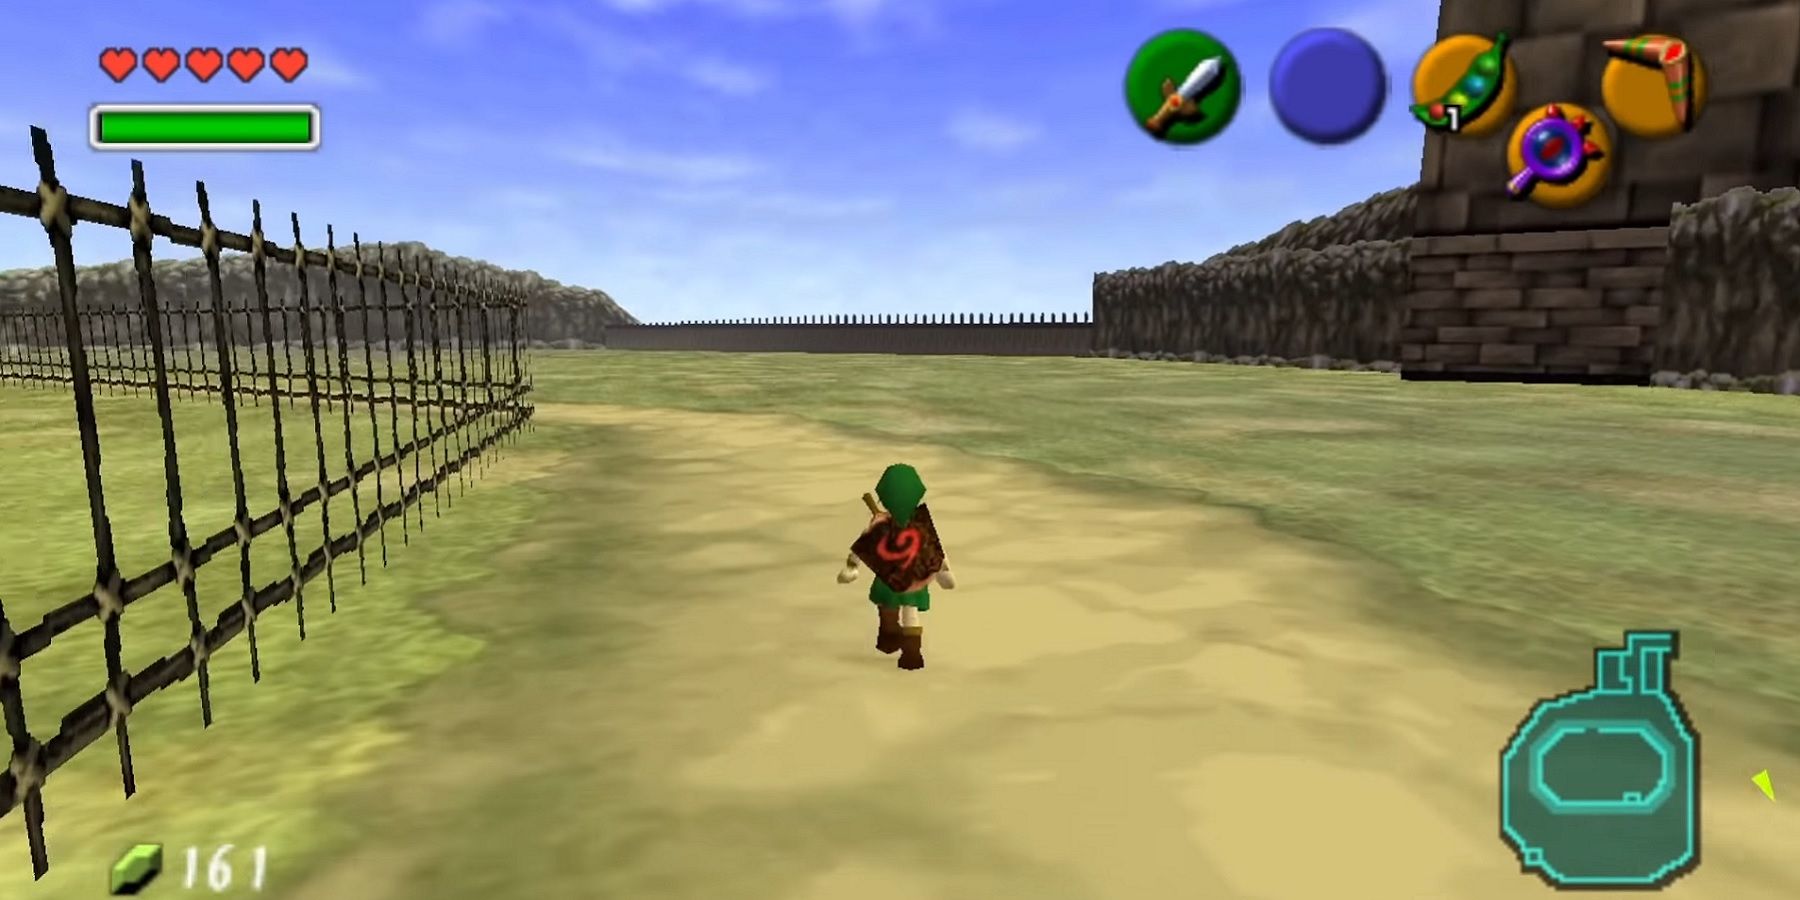 first-gameplay-footage-of-ocarina-of-time-pc-port-emerges